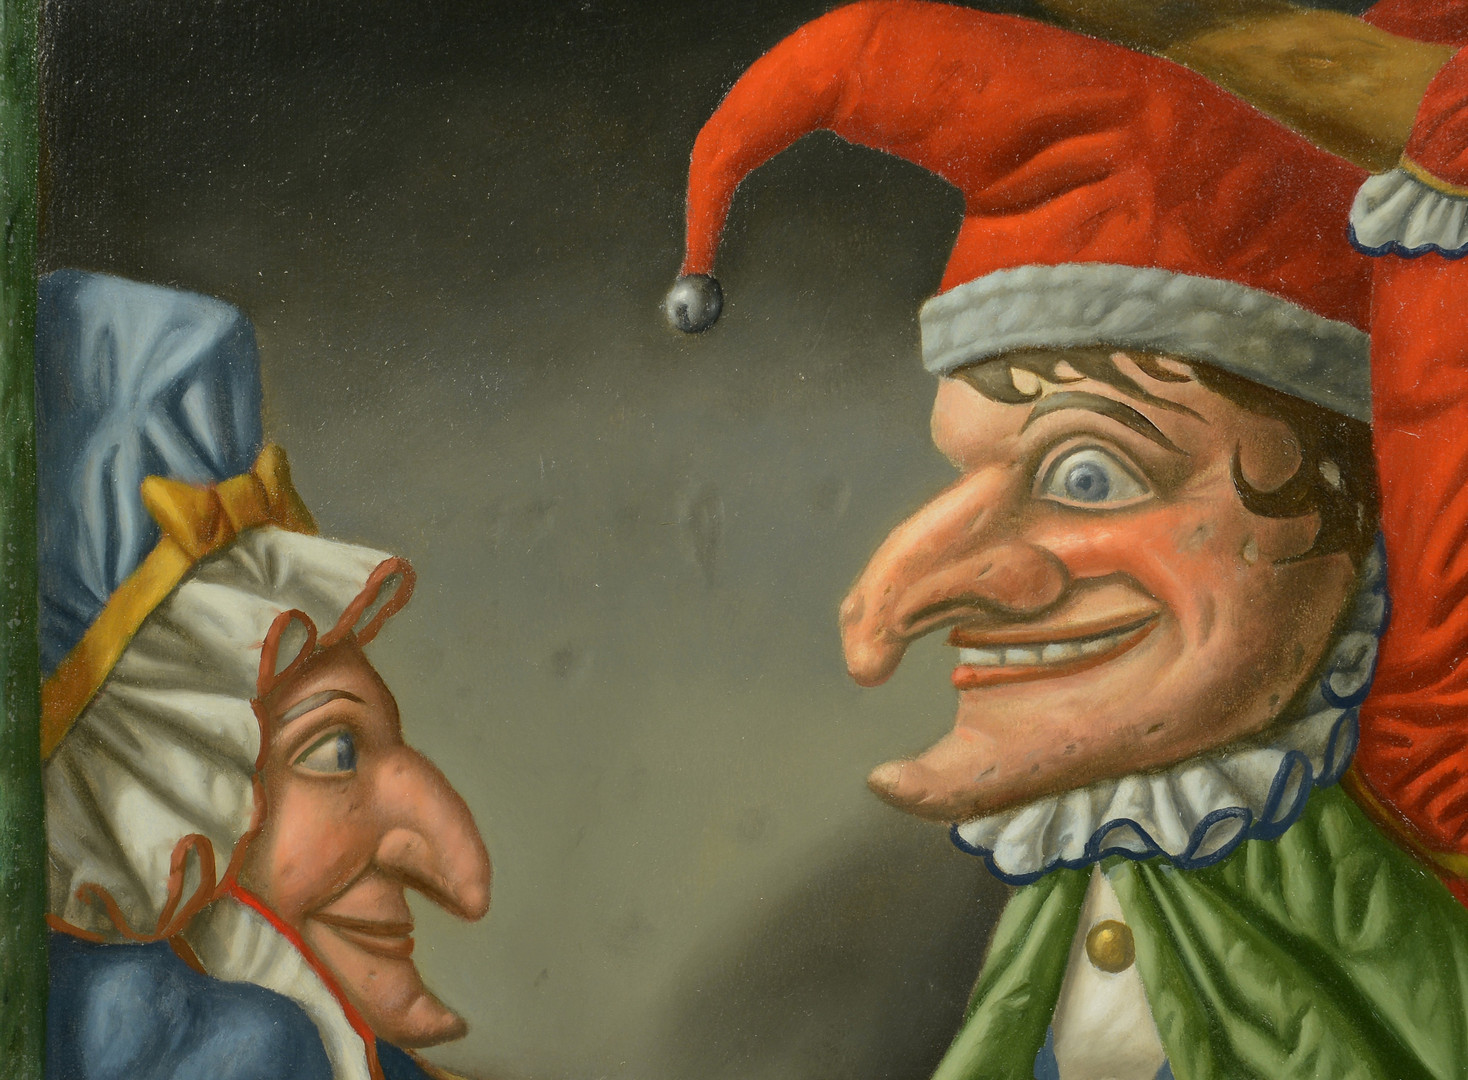 Lot 89: Werner Wildner painting, Punch and Judy